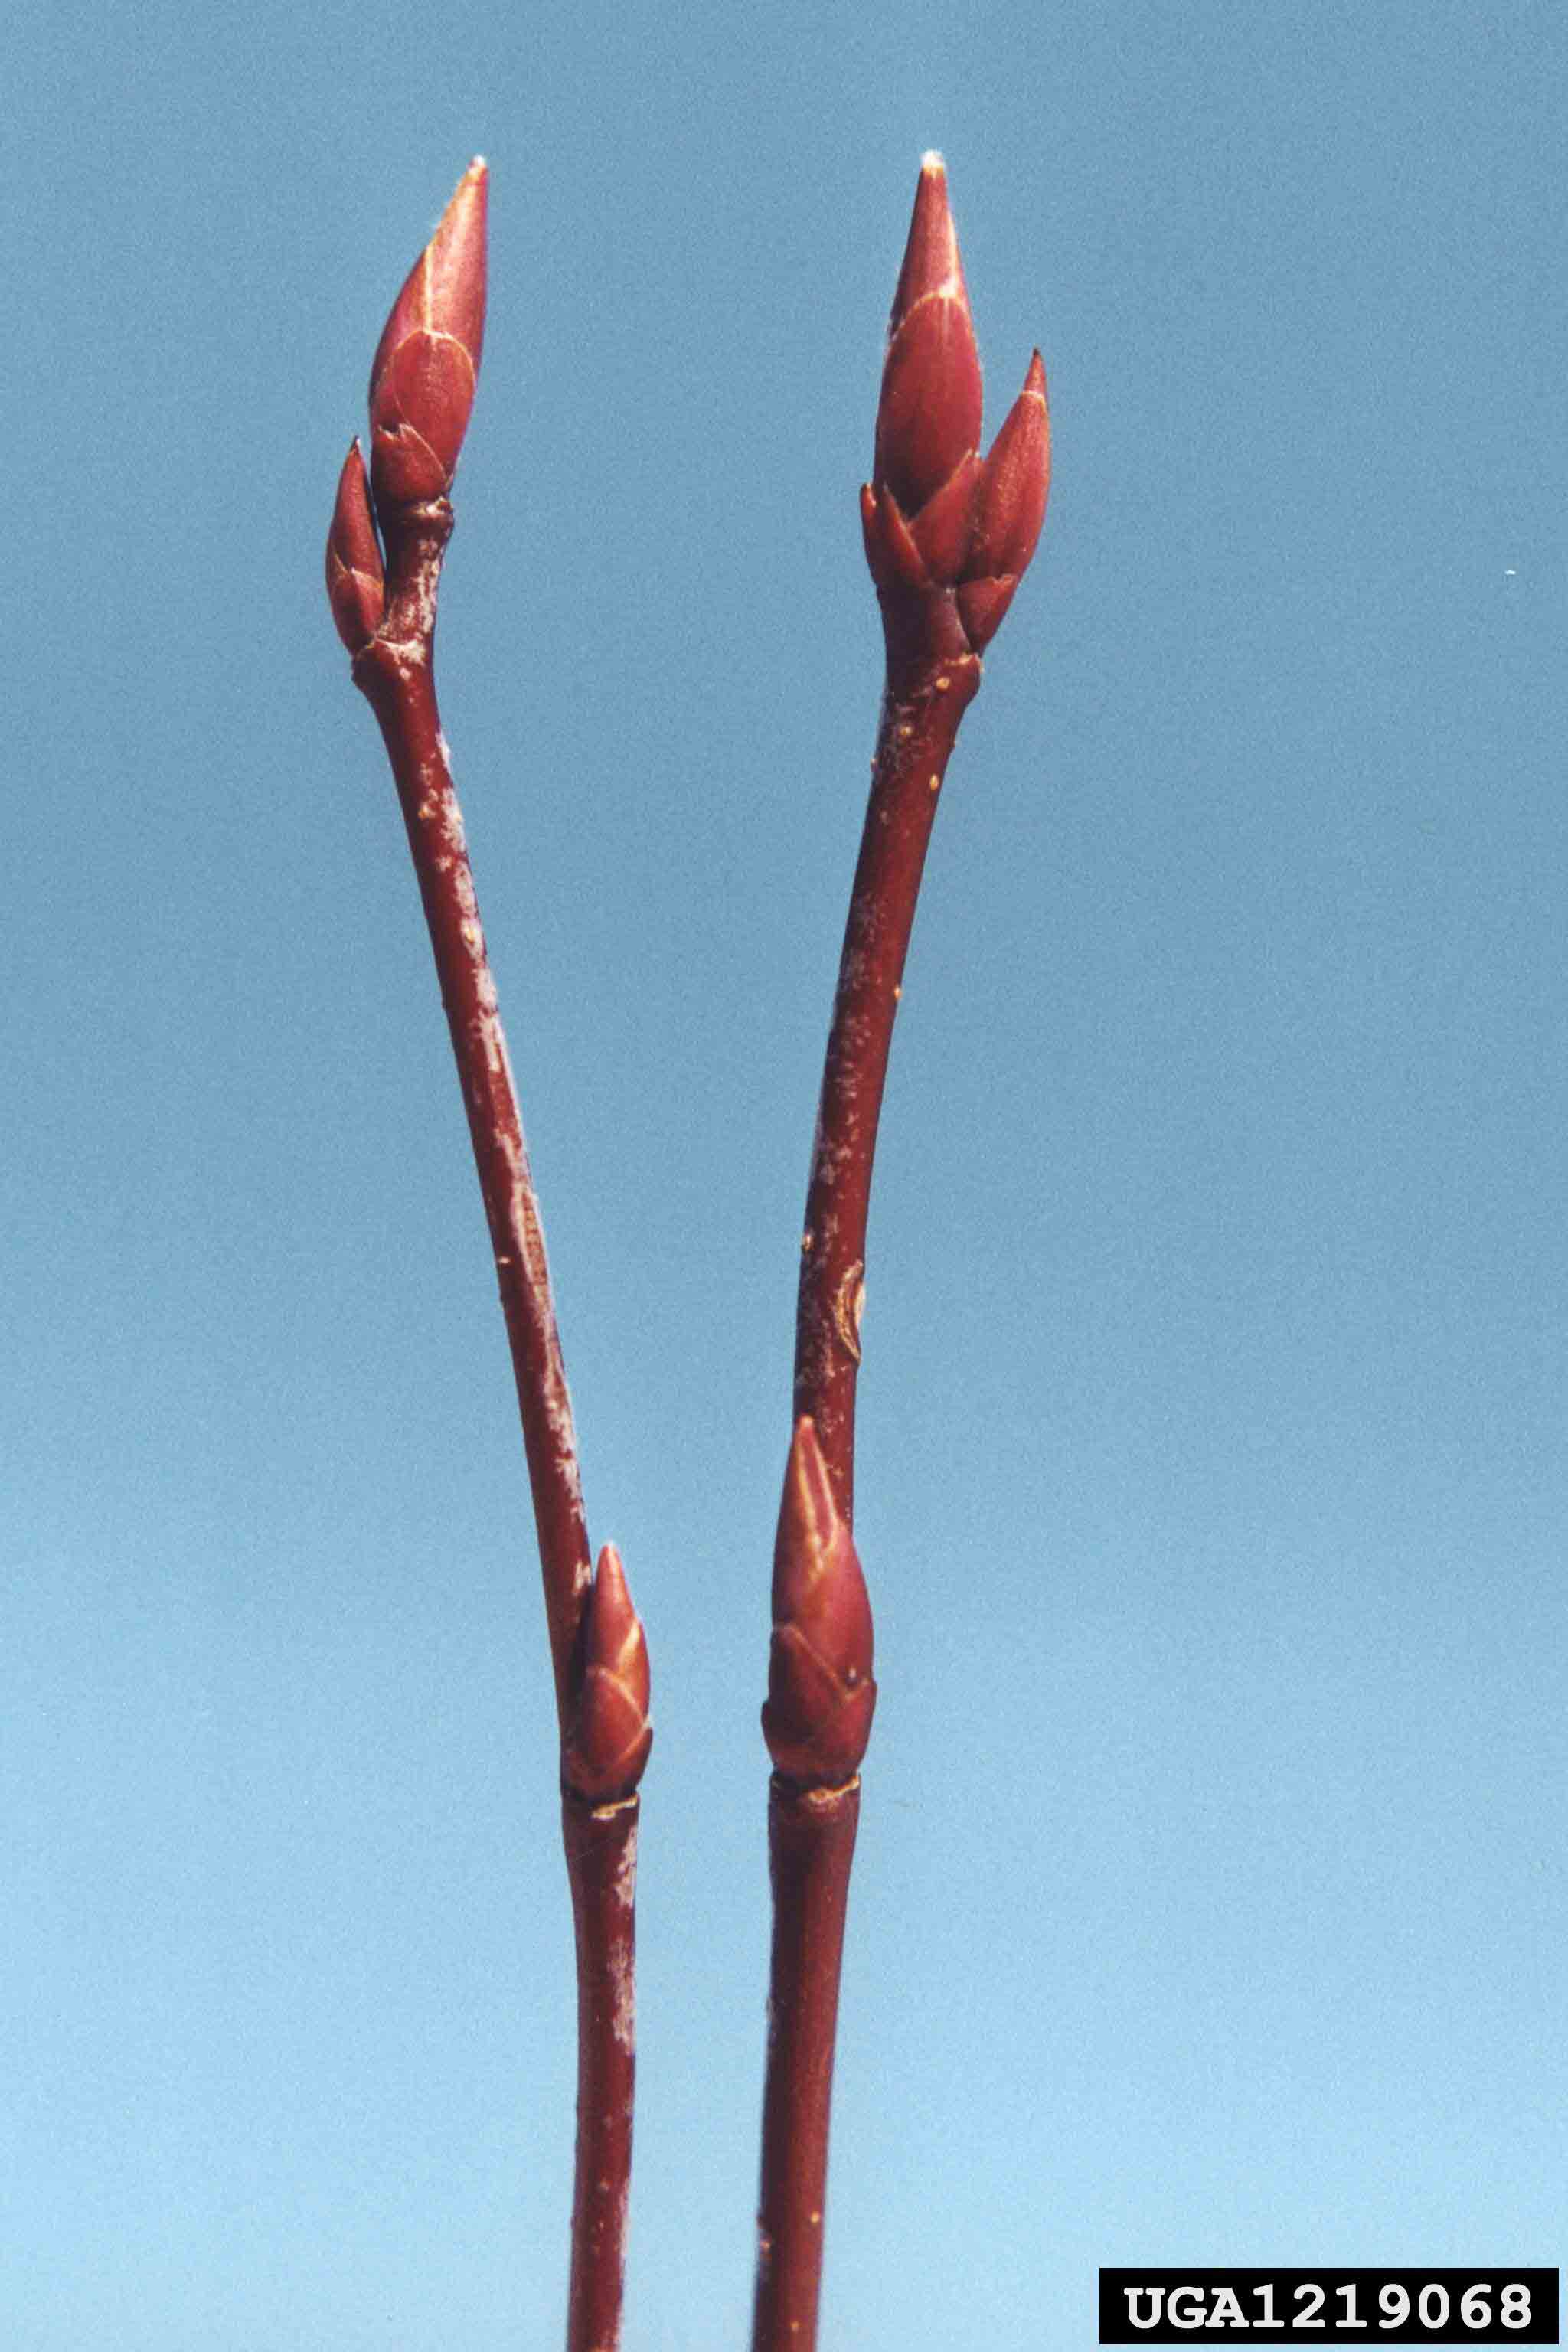 Serviceberry twigs with buds